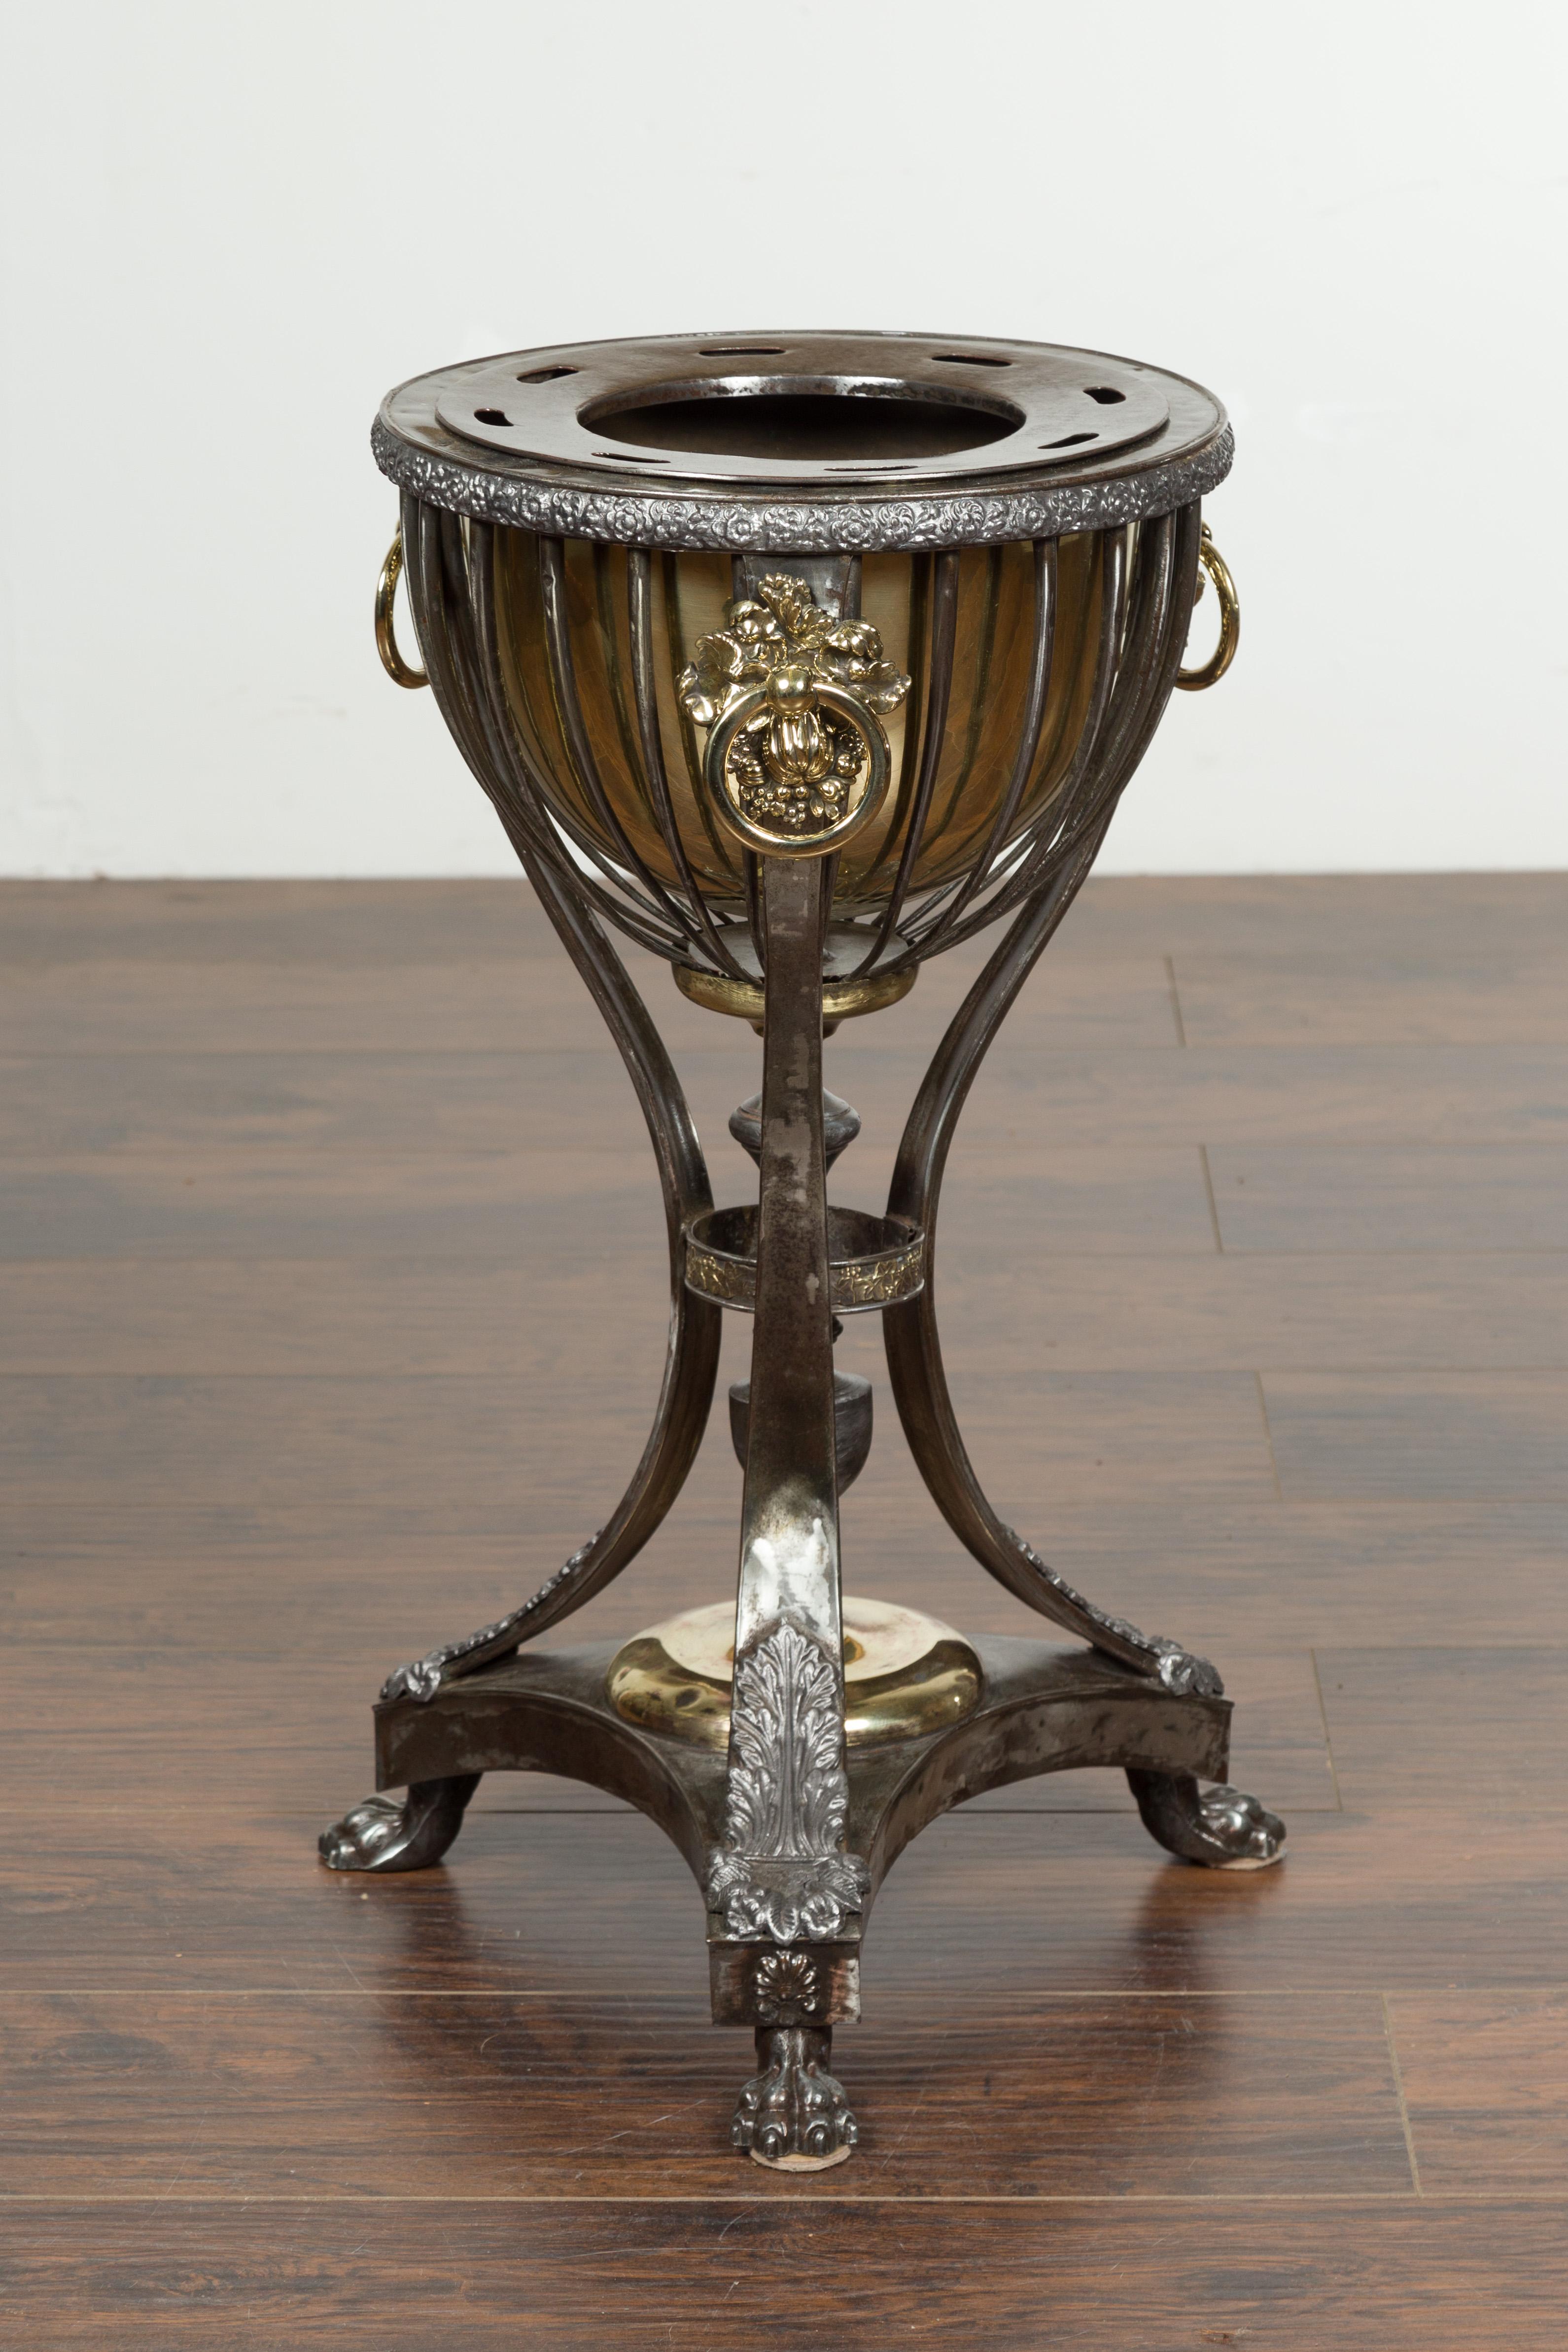 English 1820s Steel and Brass Tripod Wine Cooler with Foliage and Fruit Motifs In Good Condition For Sale In Atlanta, GA